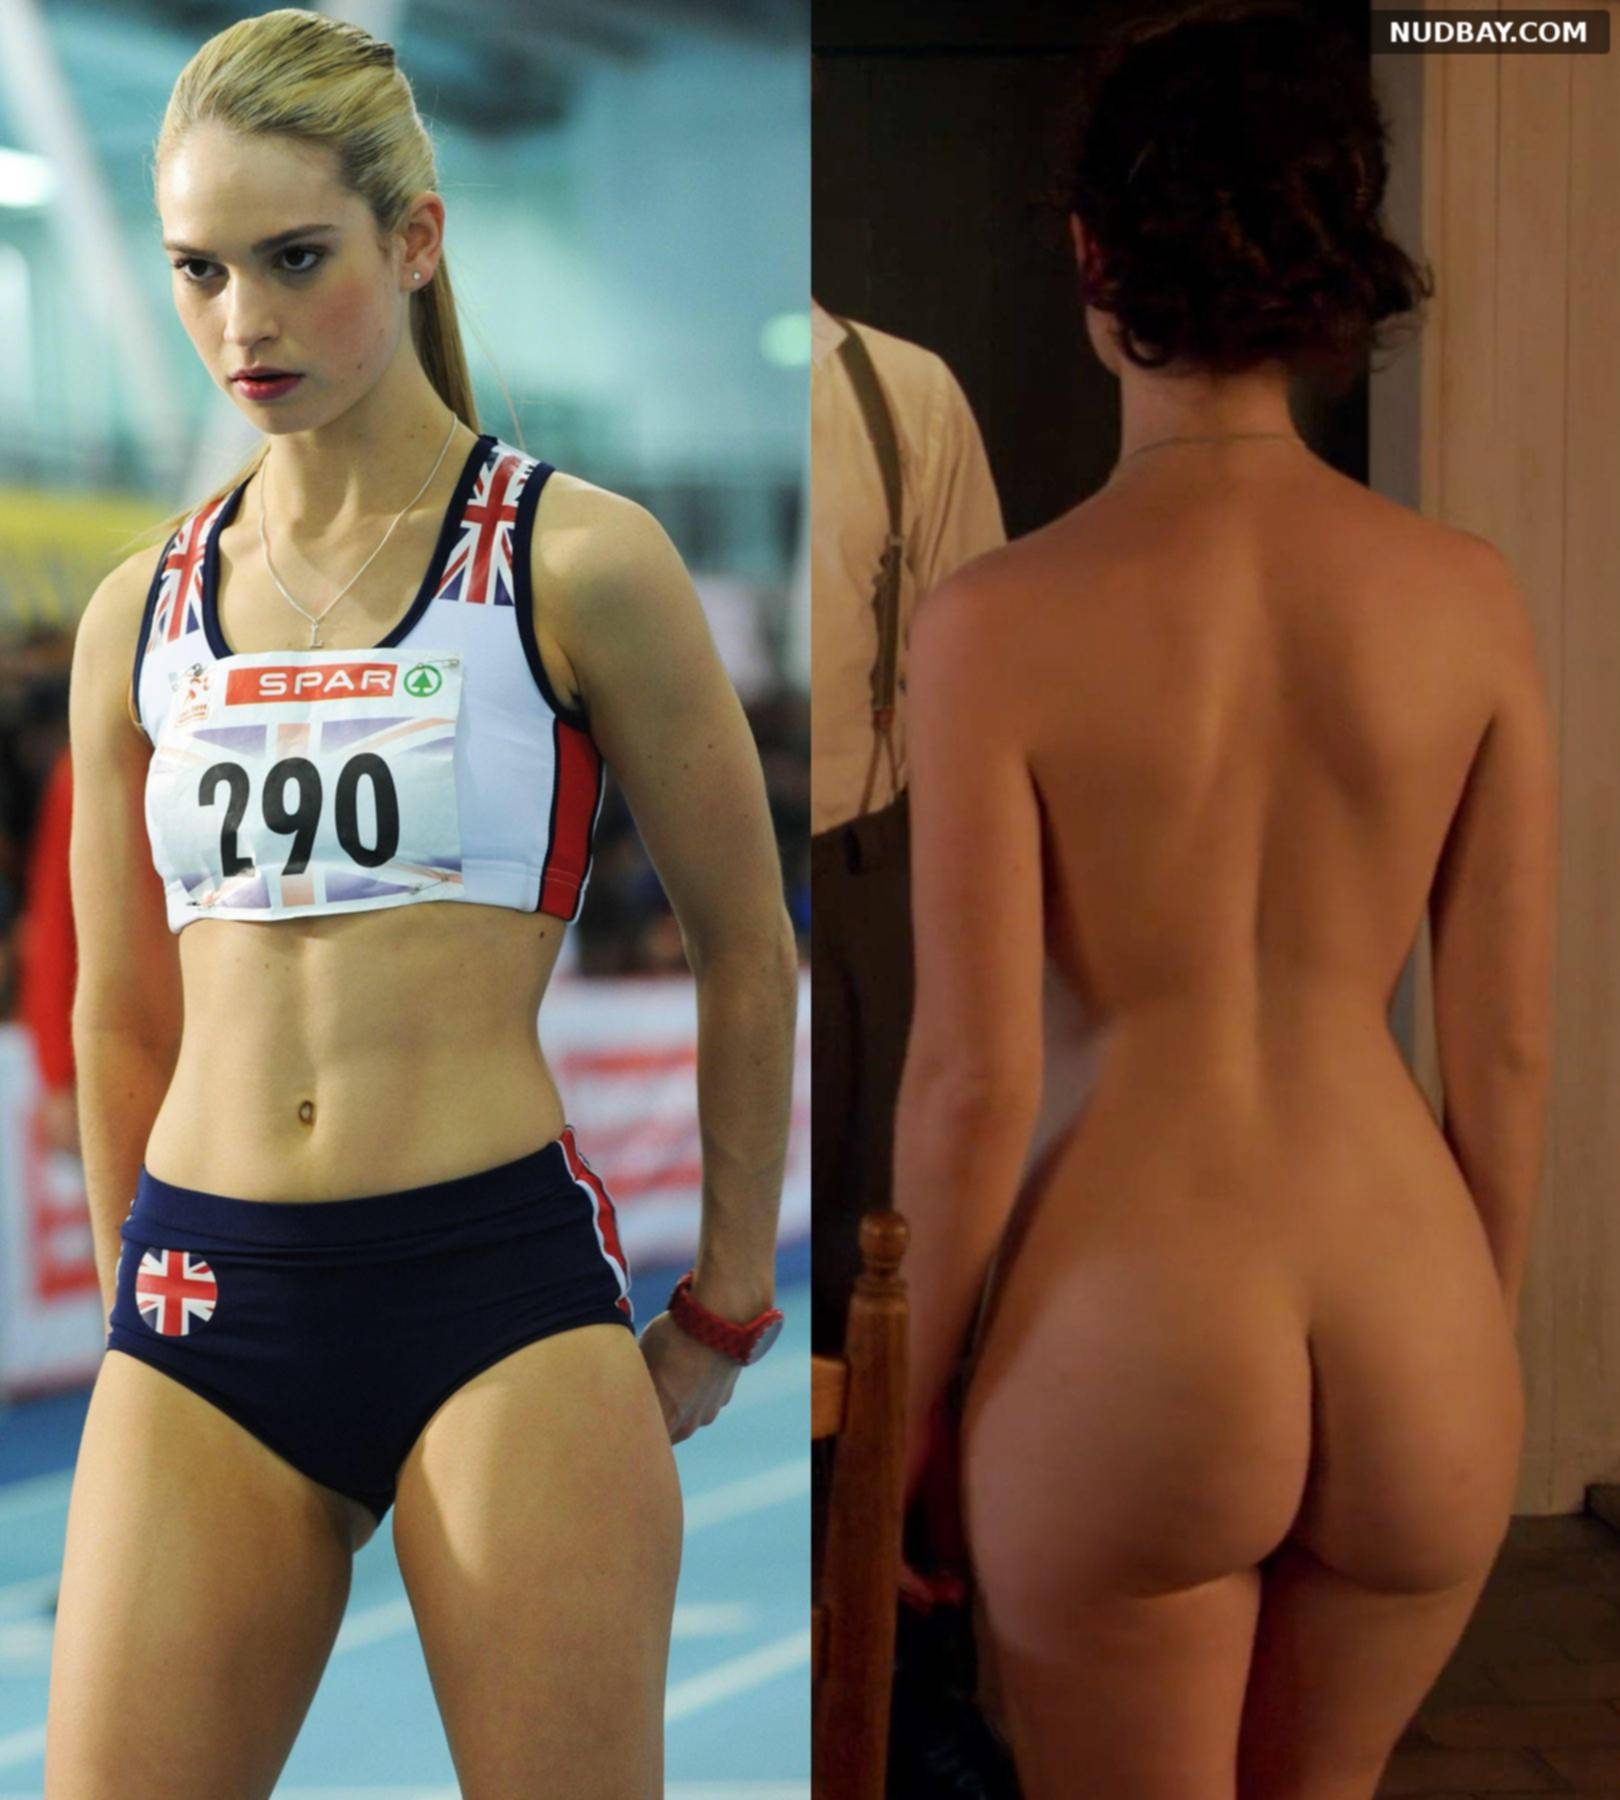 Lily james nude